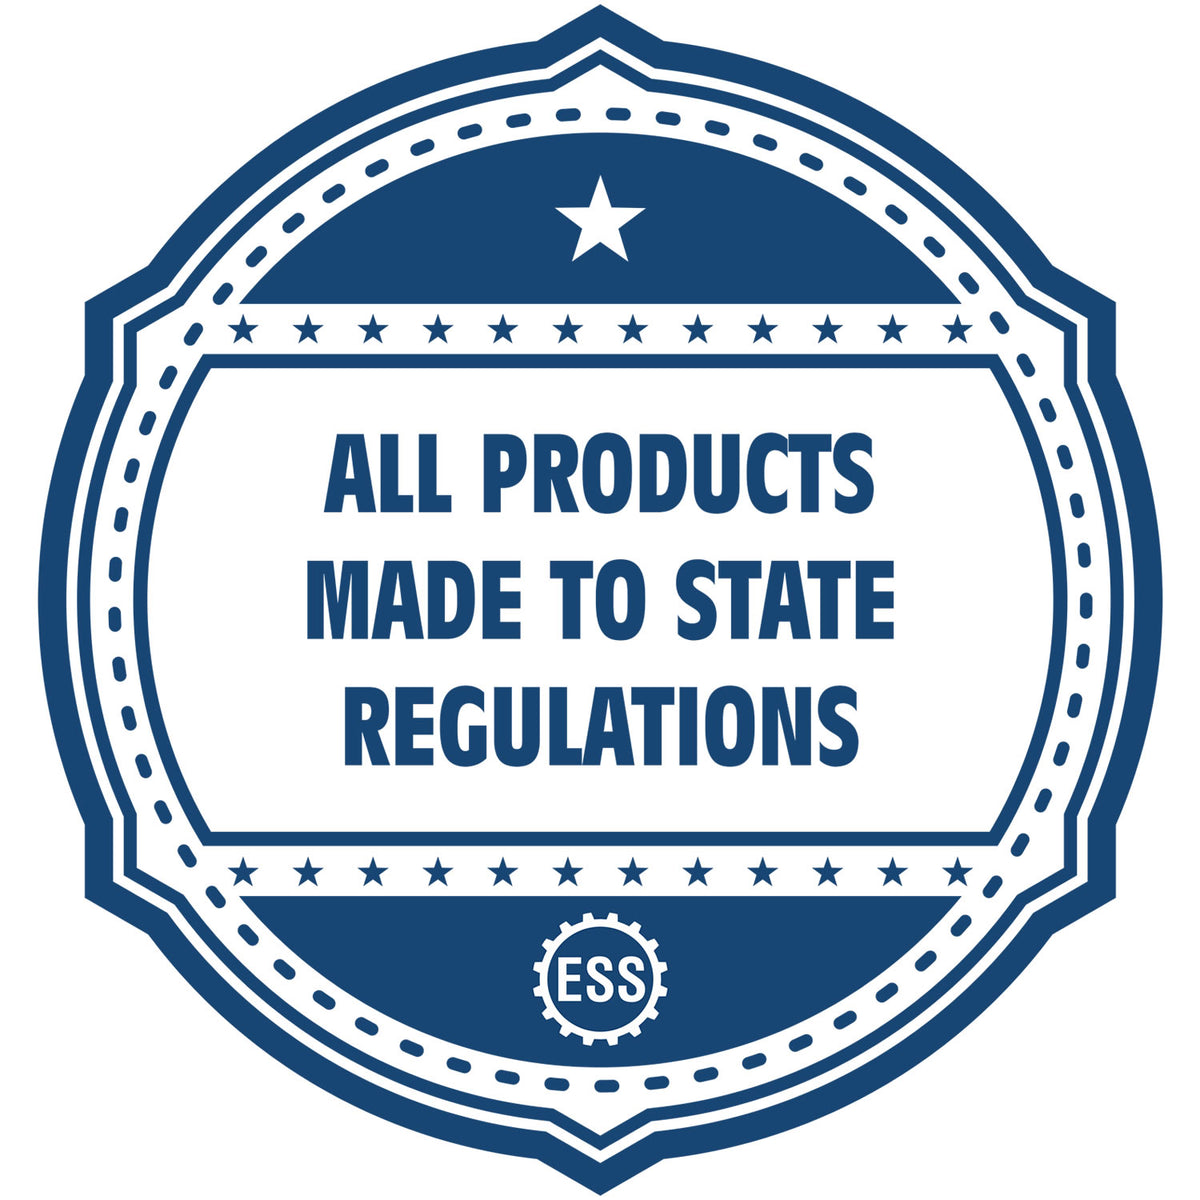 An icon or badge element for the State of Colorado Long Reach Architectural Embossing Seal showing that this product is made in compliance with state regulations.